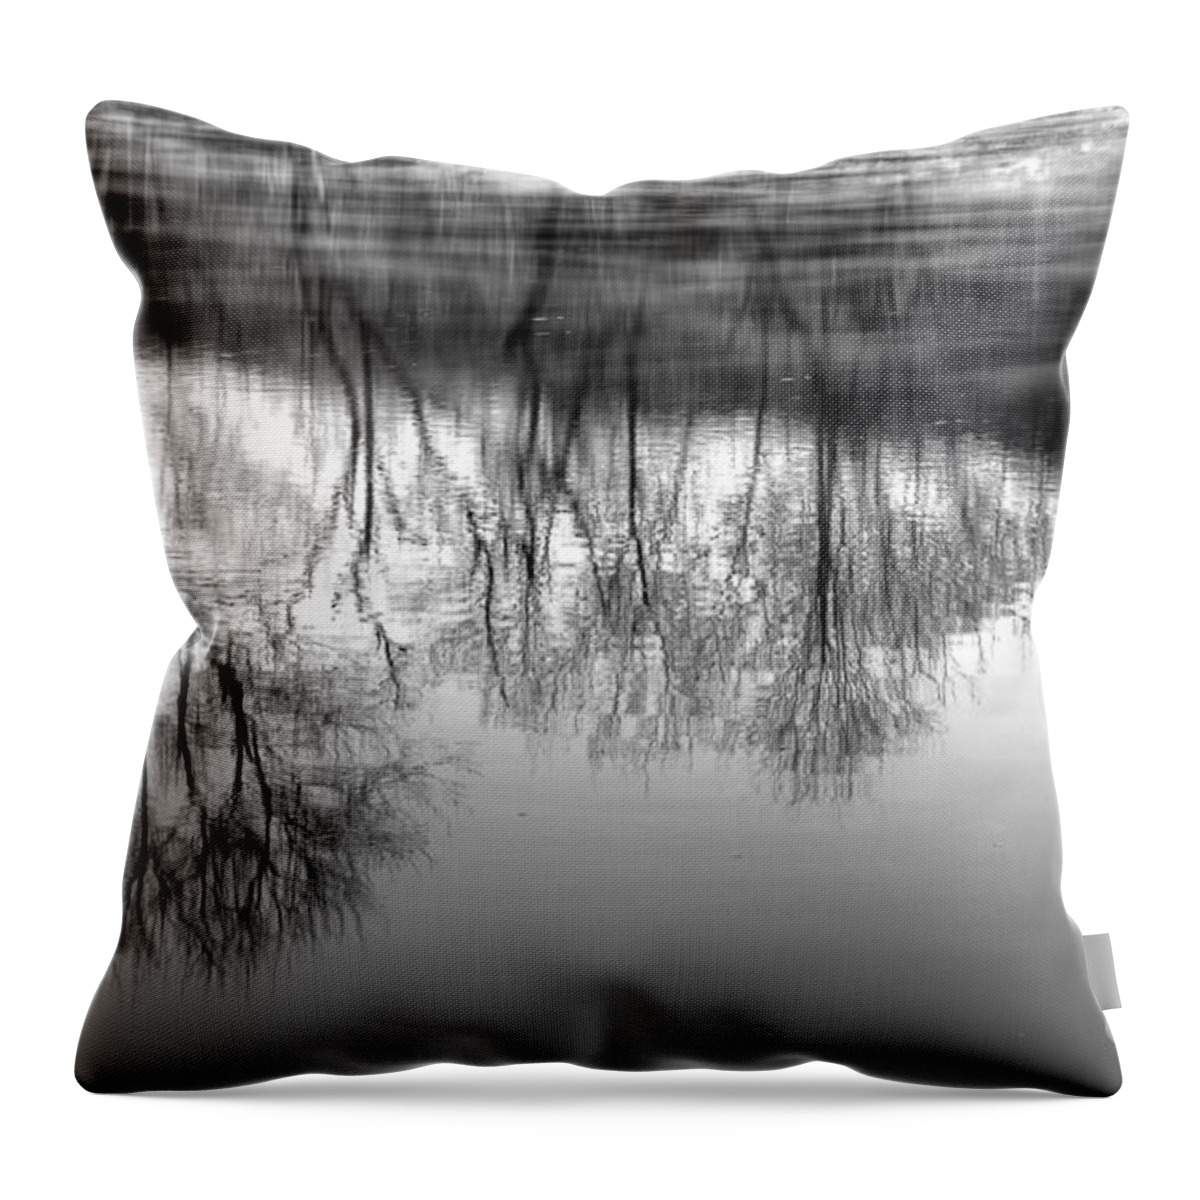 River Monochrome Throw Pillow featuring the photograph Cold Reflection by Michael Eingle